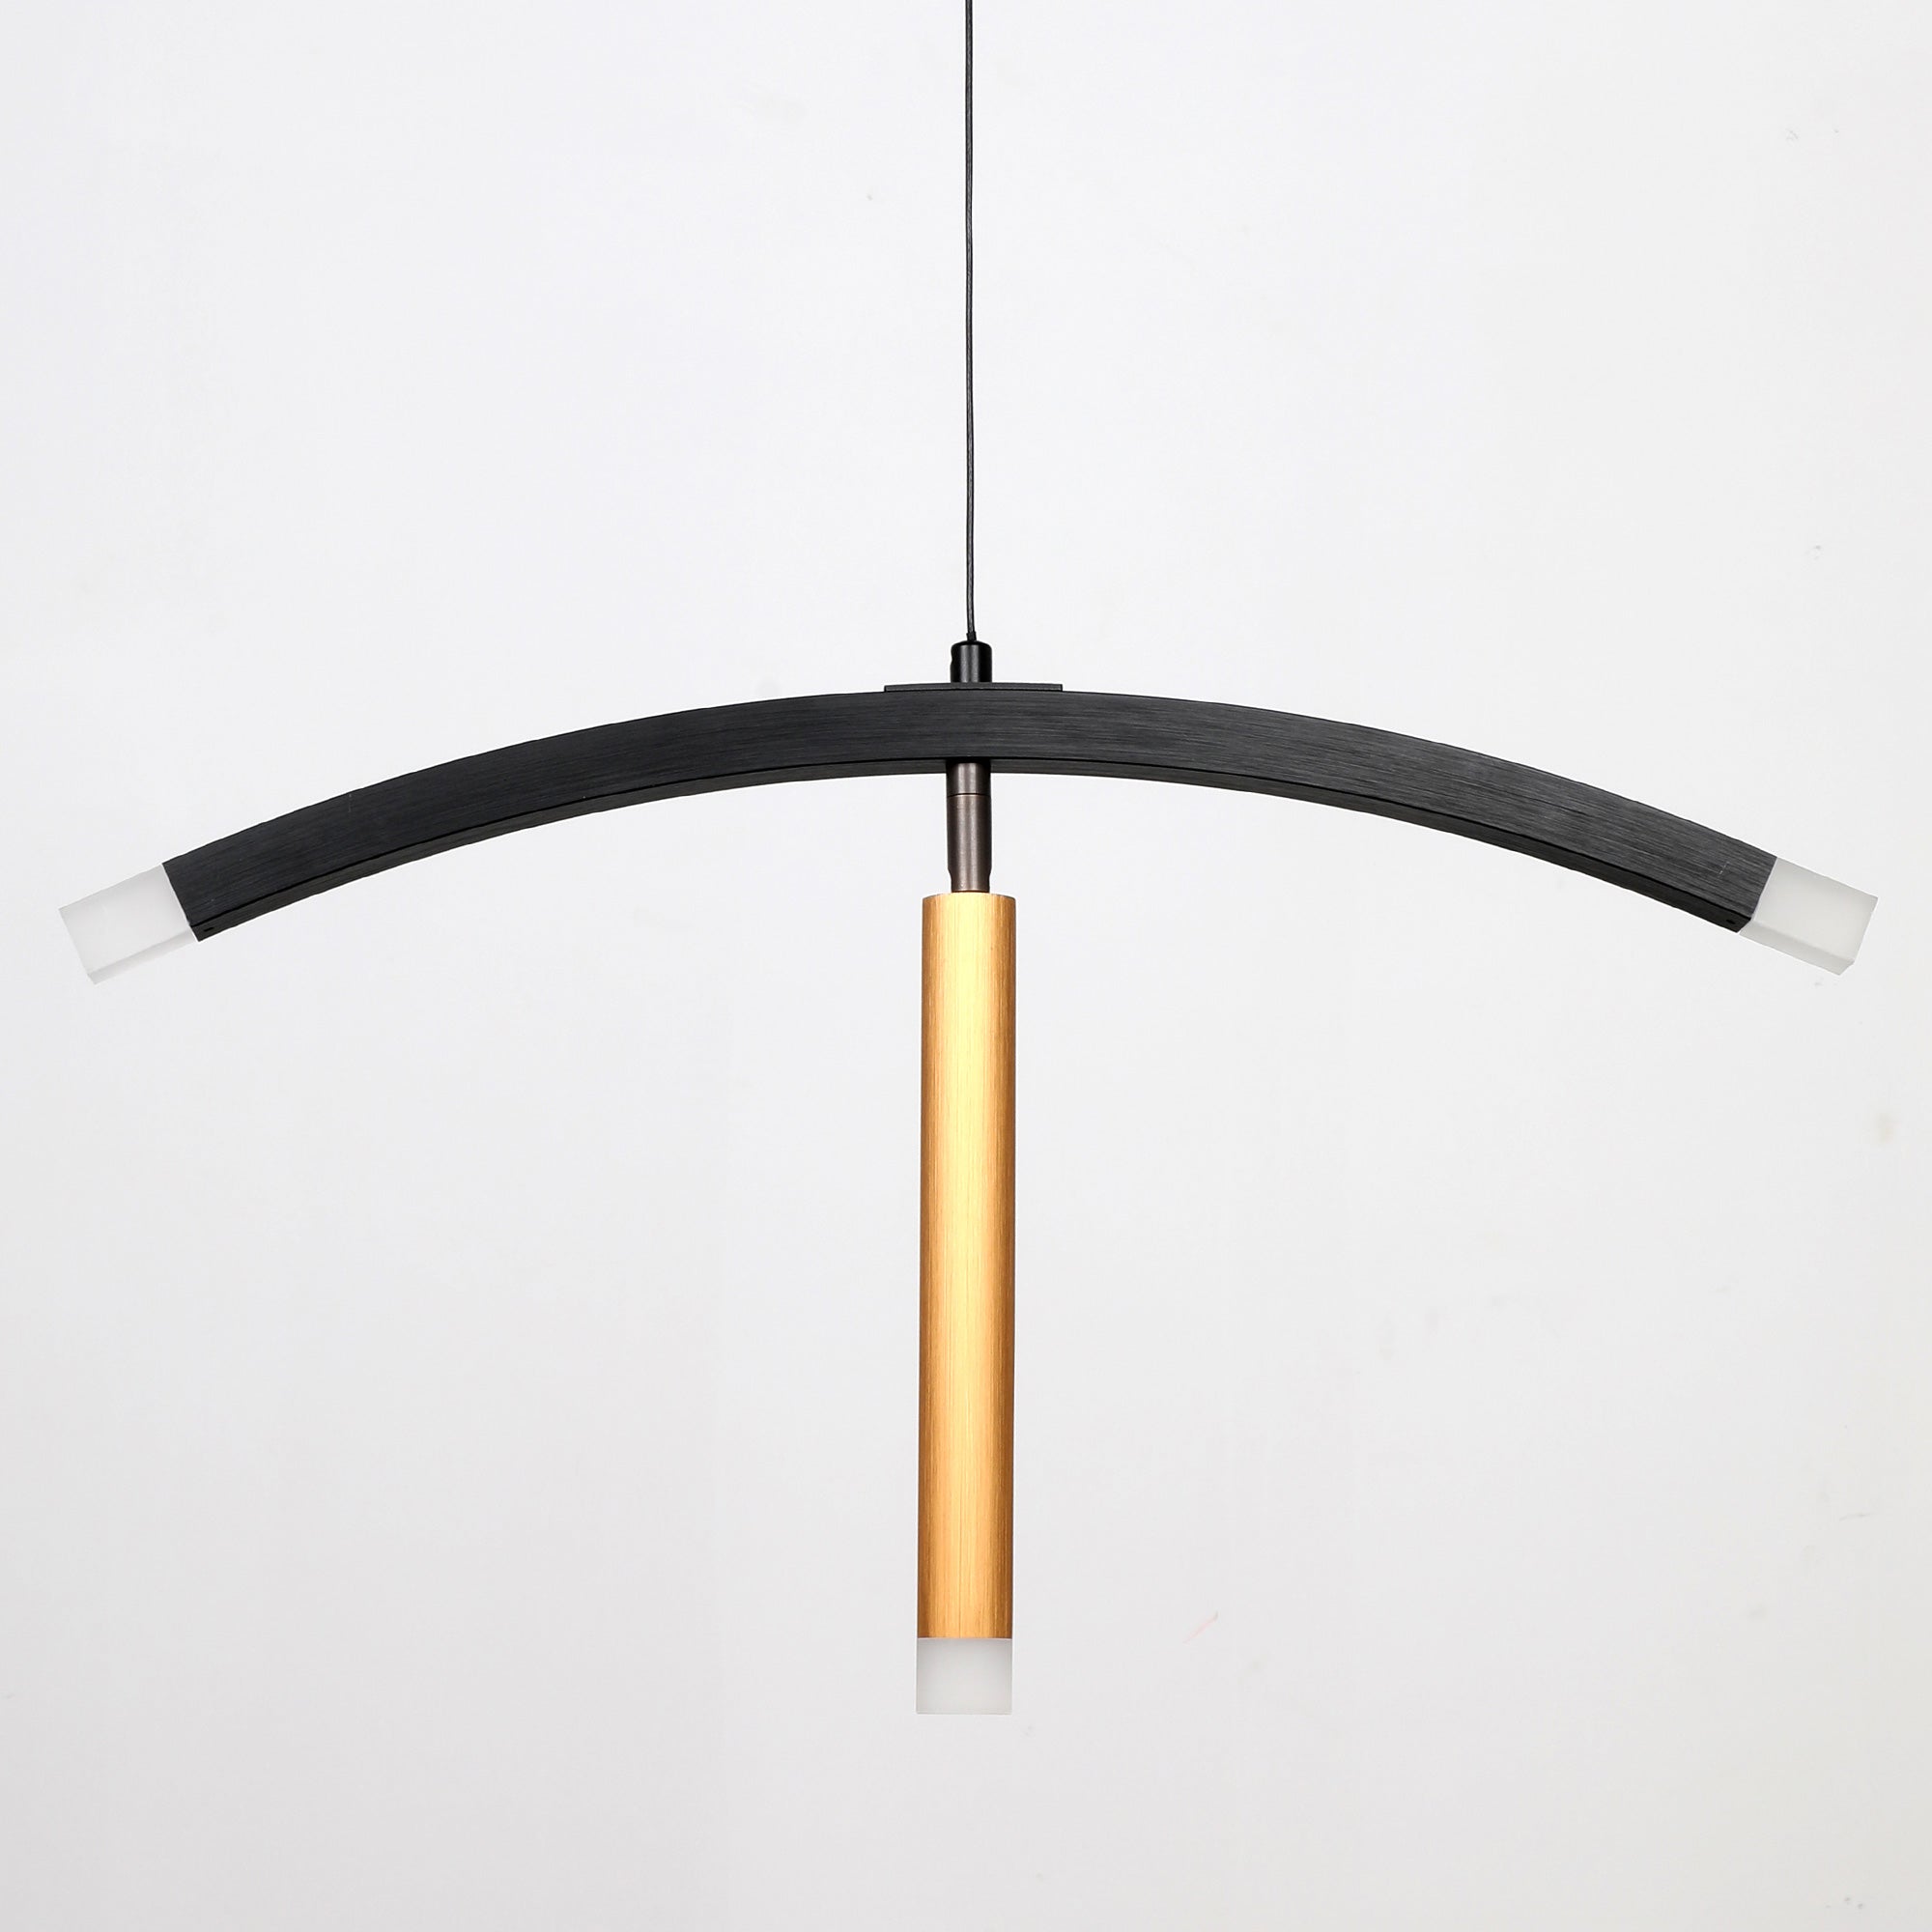 Smafan Seville Brushed Gold Simple Decoration Hanging Kitchen LED Pendant Light brings a clean and simple design.Descending from a single hanging cord,simply streamlined-design pendant light fully demonstrates the art and beauty of simpleness.This pendant showcases a balance of materials and a stylish glow to bring some contemporary flair to its surroundings.